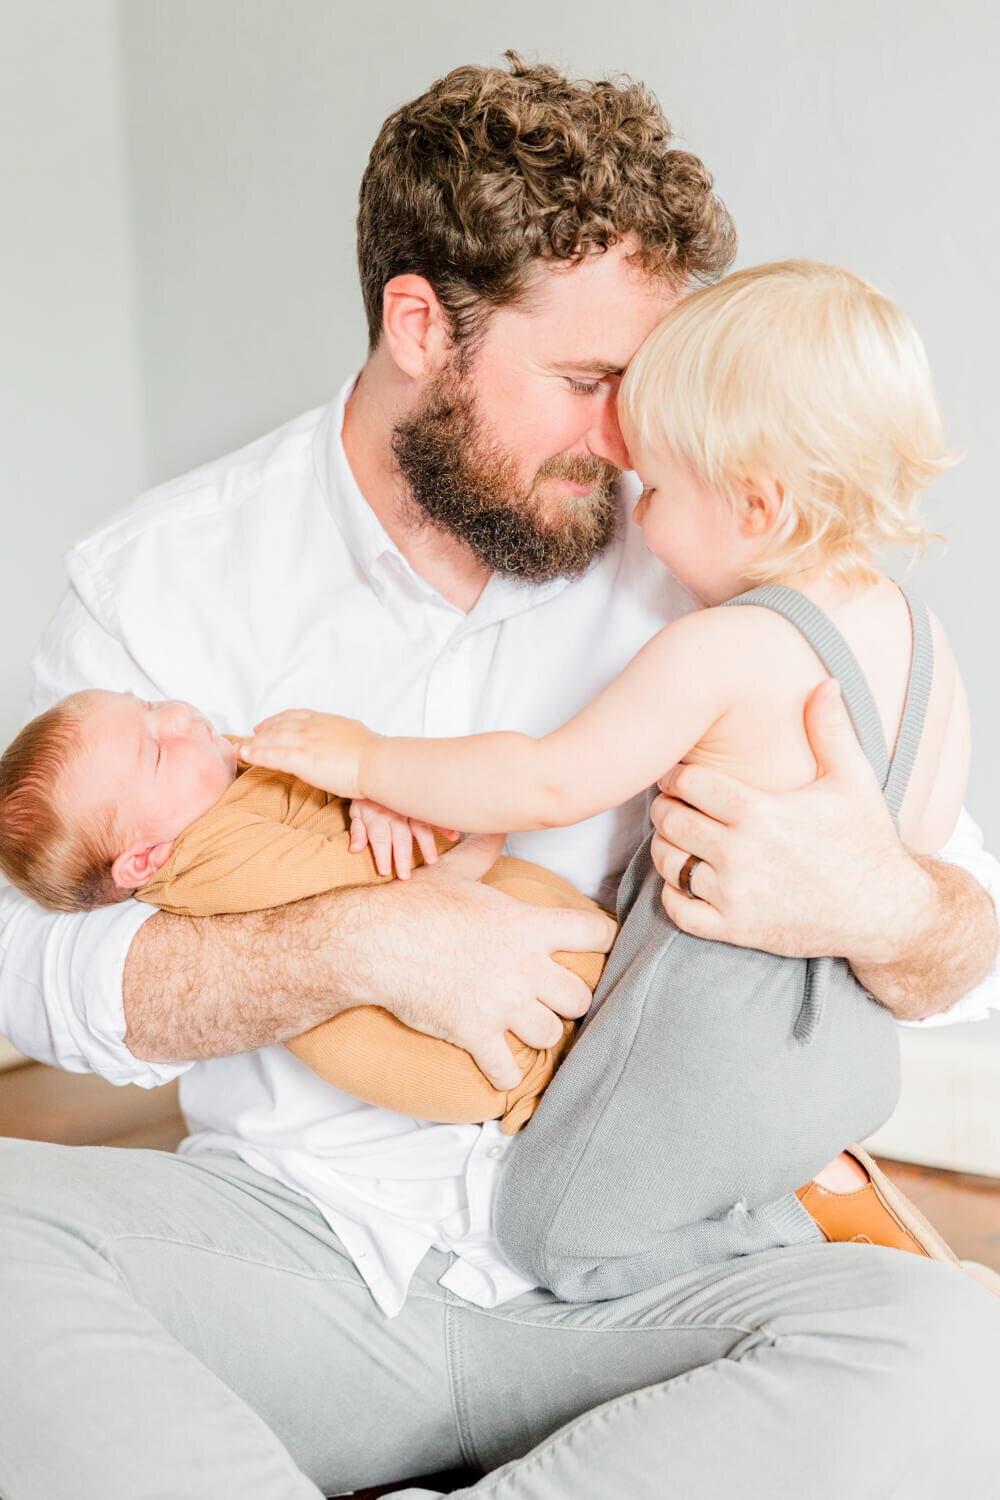 Dad snuggles toddler in one arm while the toddler gently pats the newborn in dad's other arm